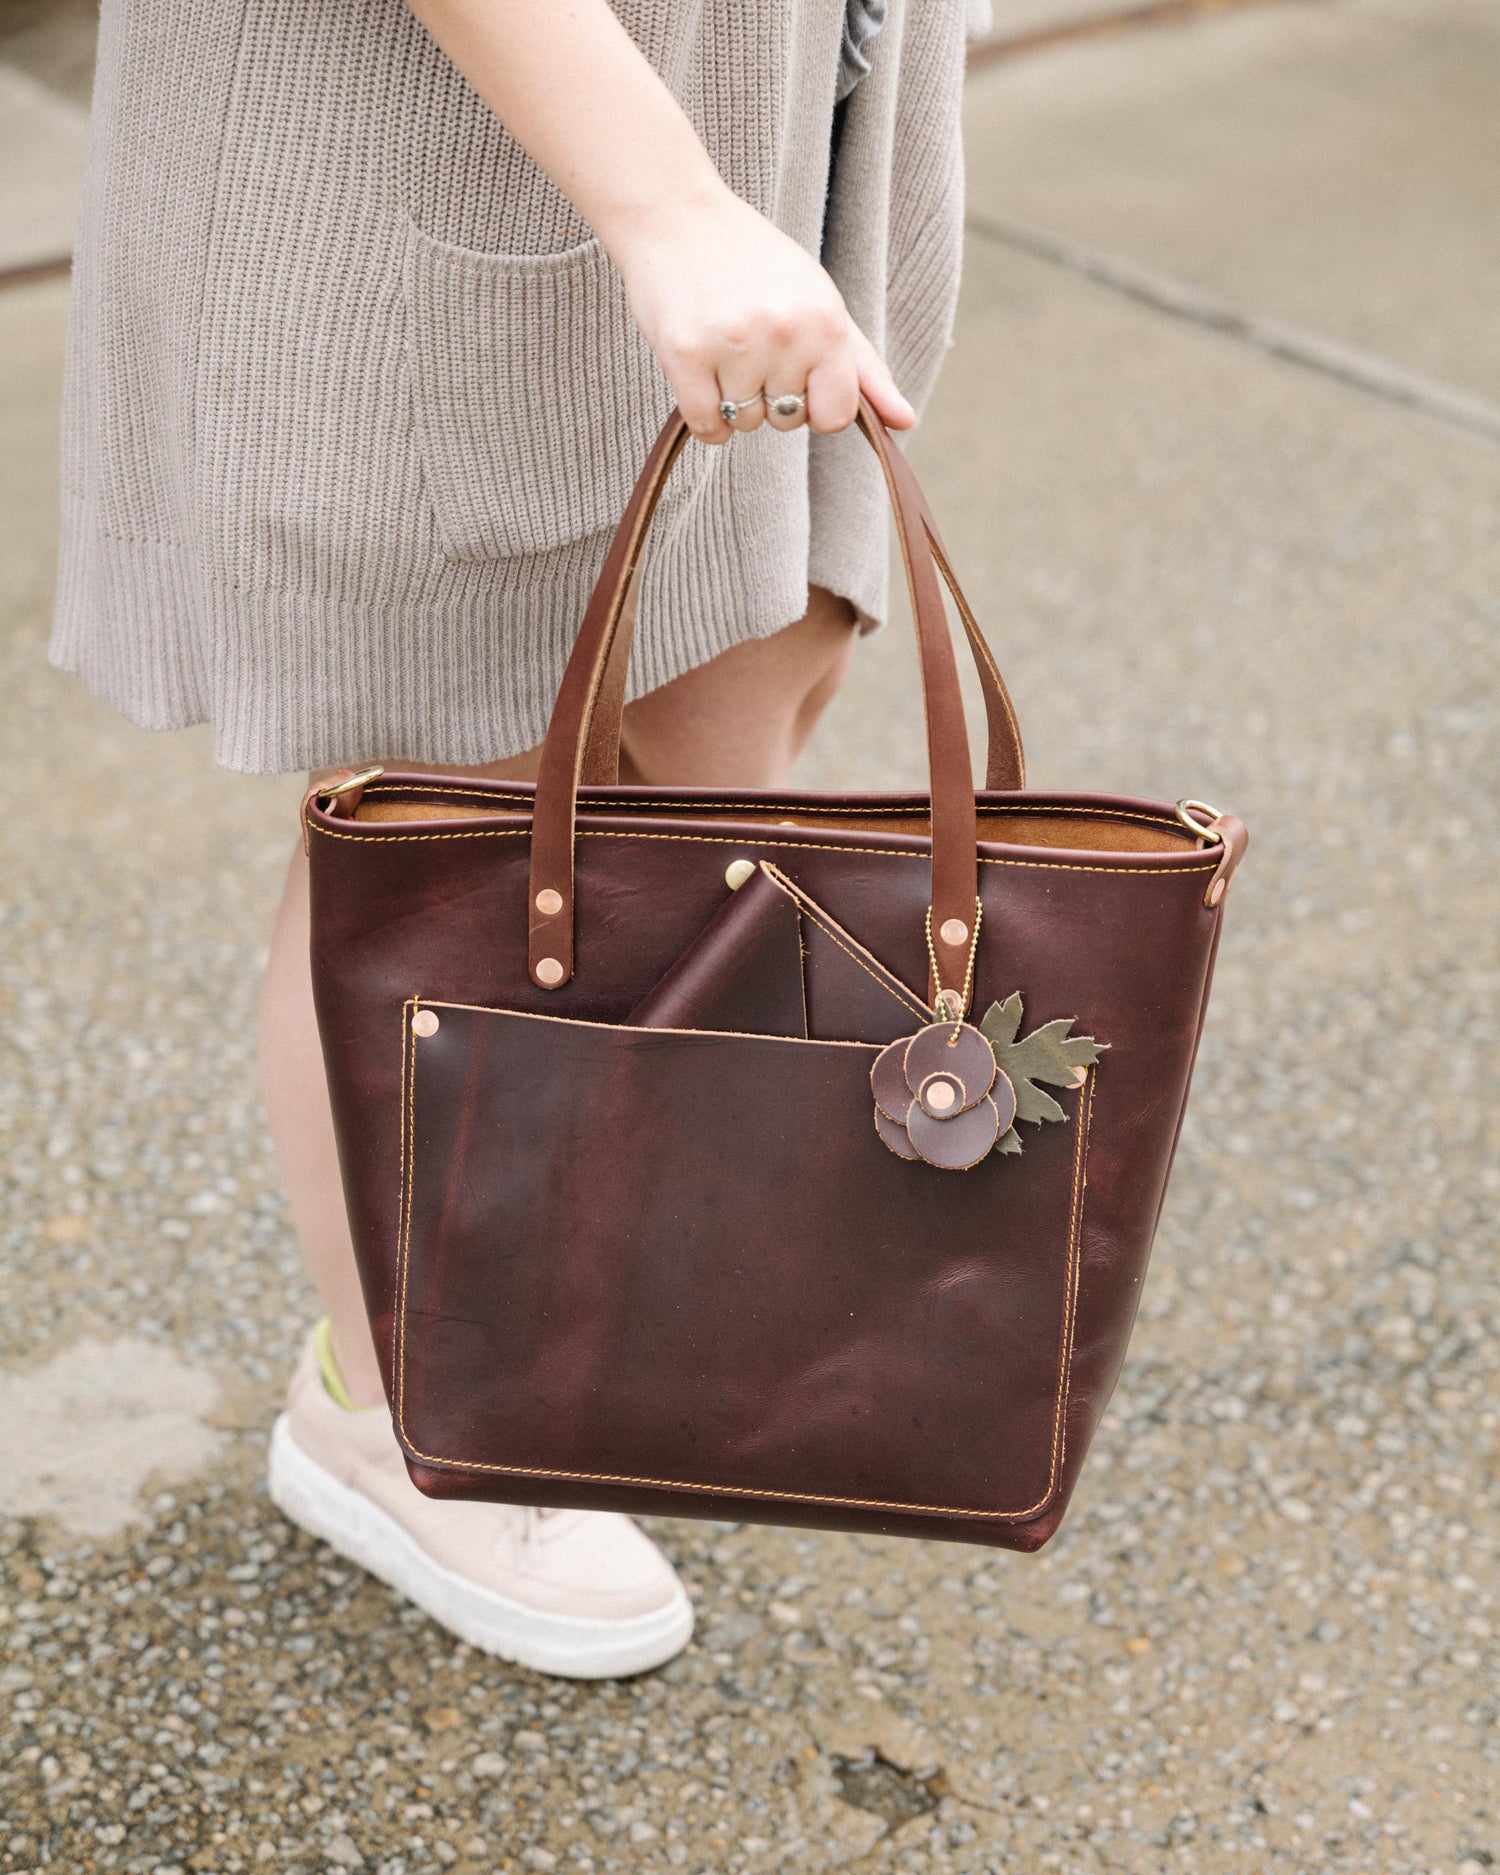 Oxblood Tote | Handmade Leather Tote Bag by KMM & Co. 11-inch +$25 / Crossbody Strap (FINAL Sale) +$65